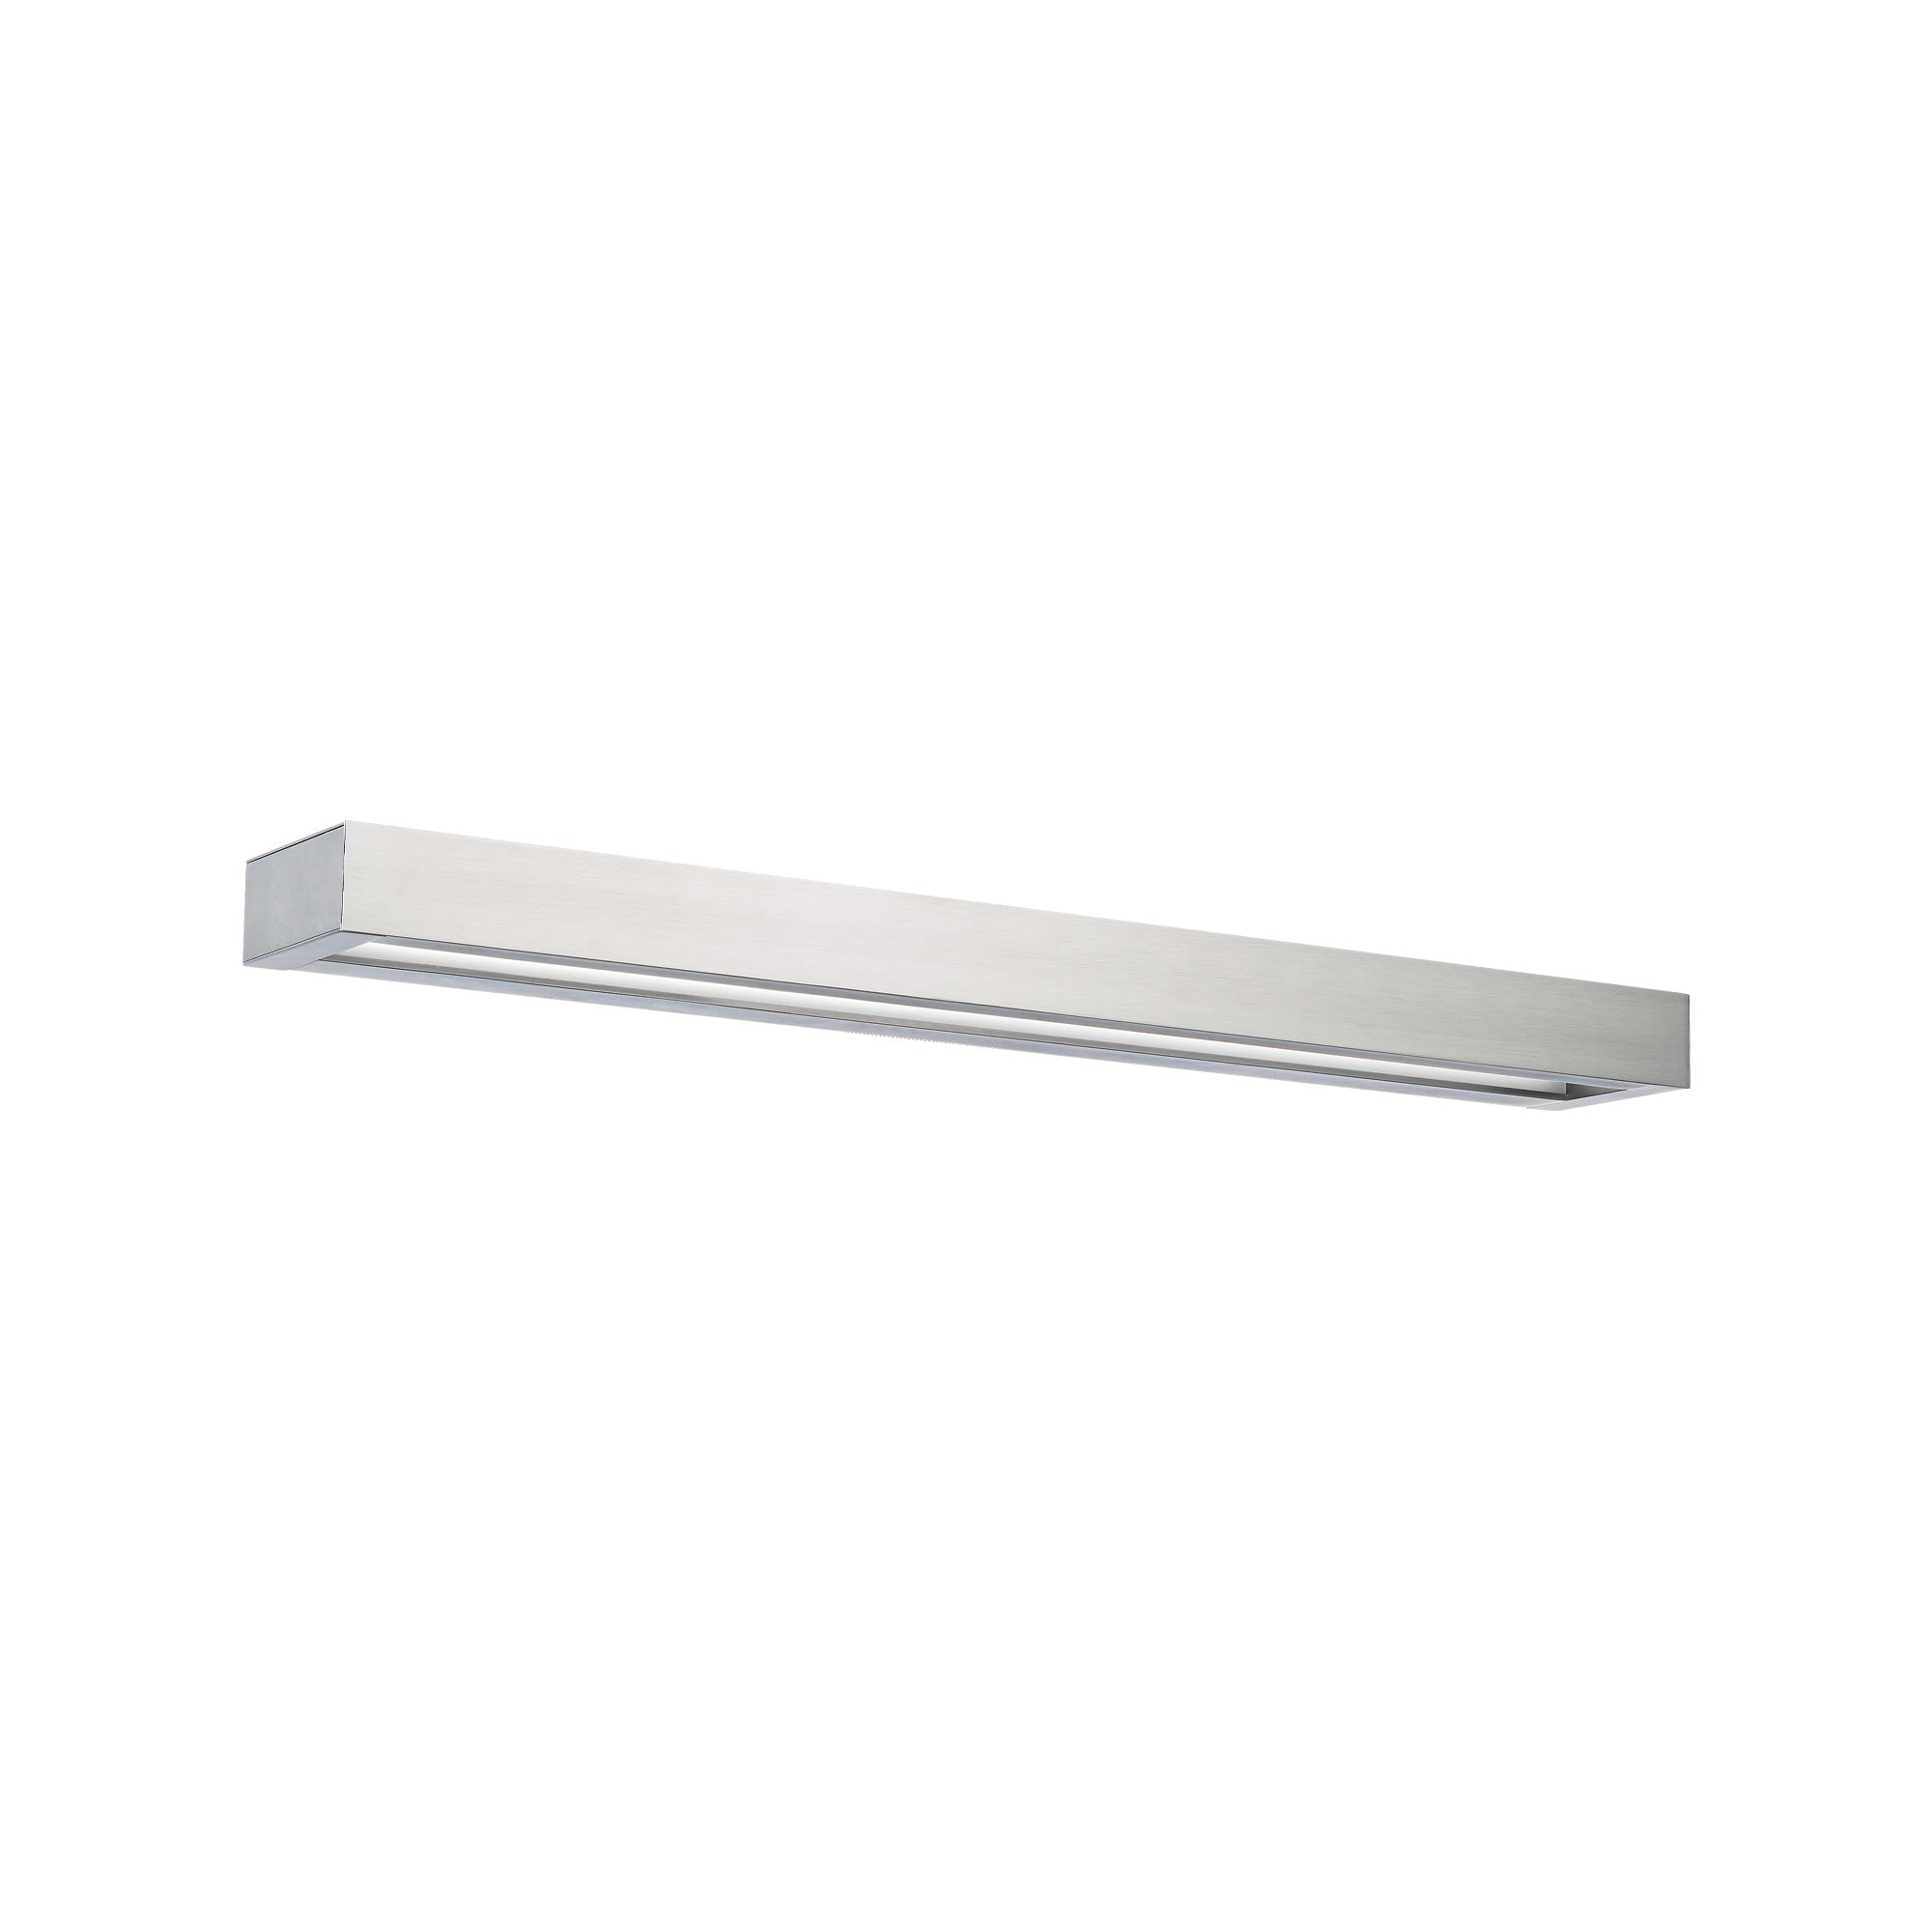 OPEN BAR Bathroom sconce Nickel INTEGRATED LED - WS-52127-35-BN | MODERN FORMS